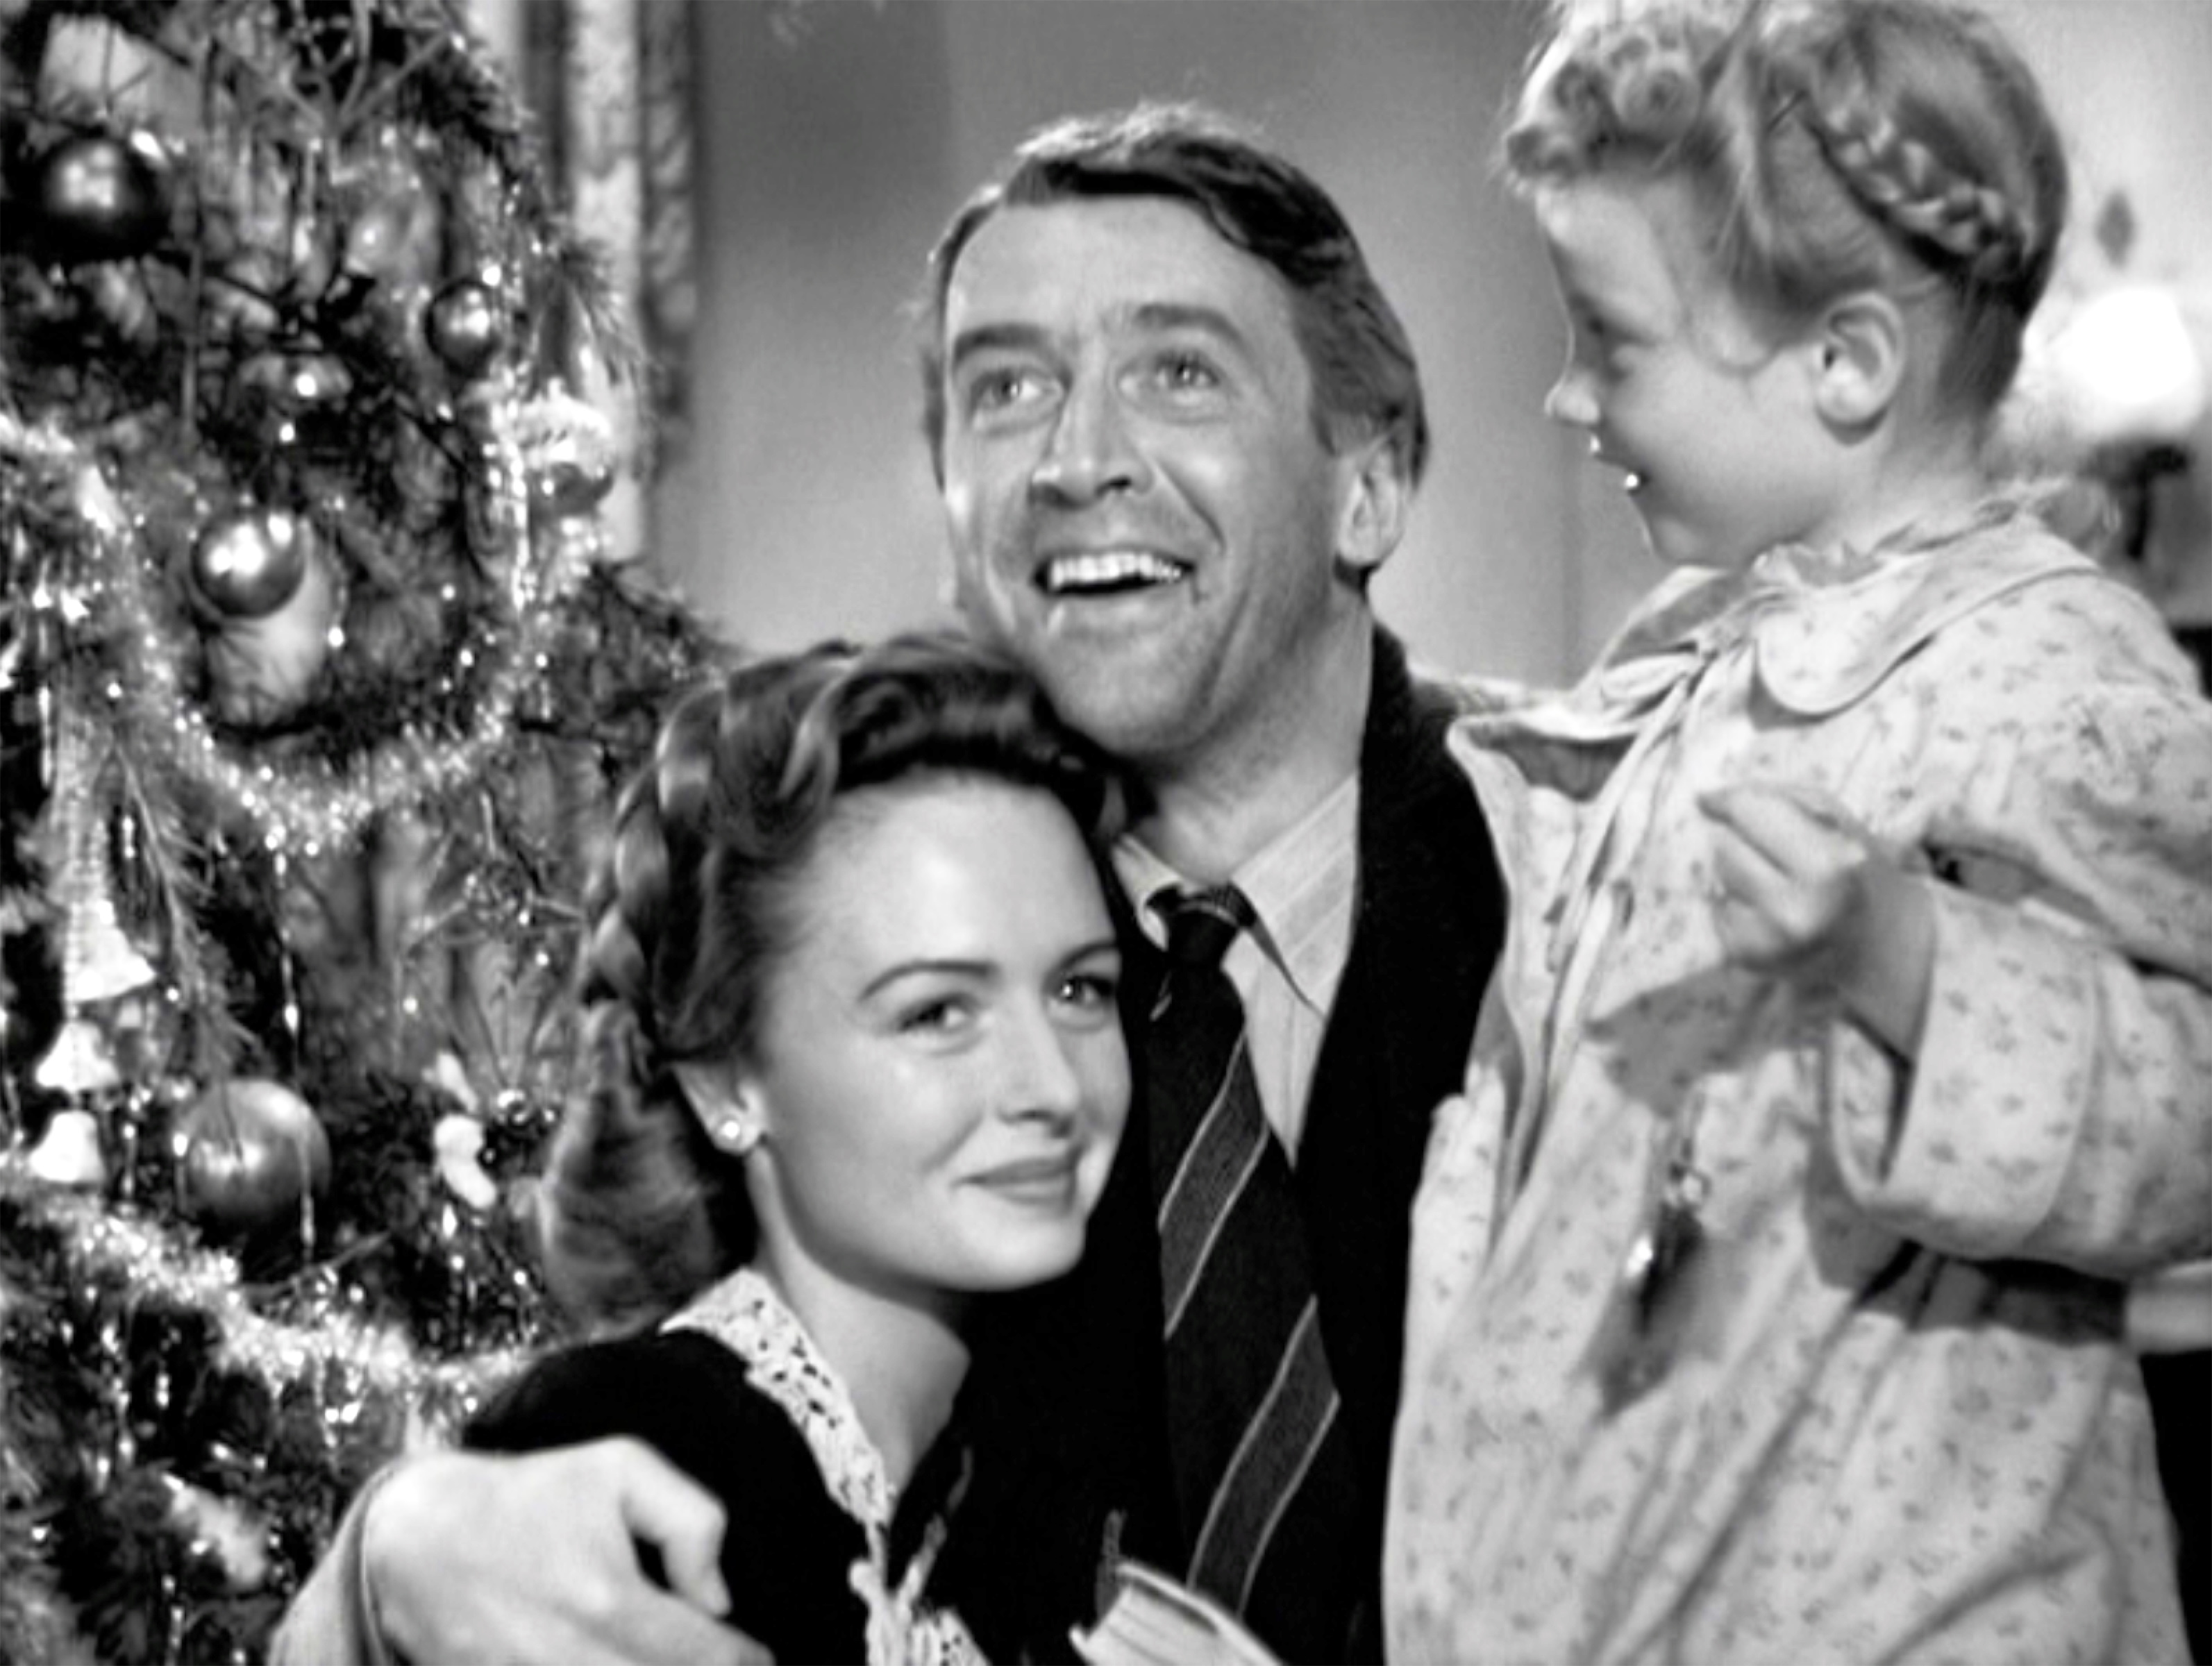 Jimmy Stewart with his arms around Donna Reed and Karolyn Grimes in 'It's a Wonderful Life'